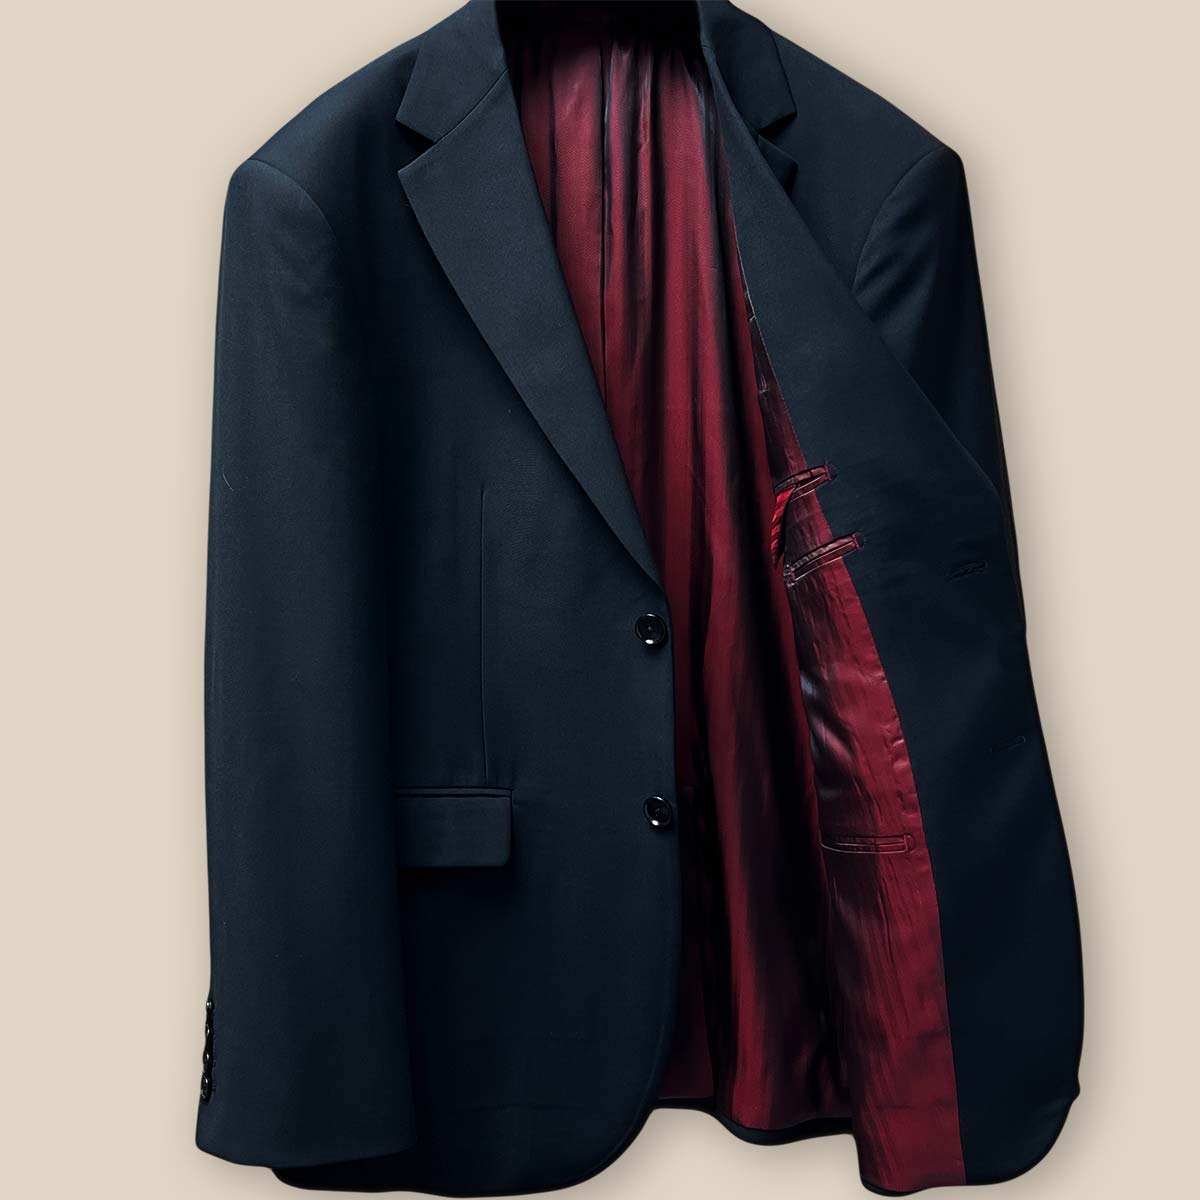 Inside view of the left side of the jacket highlighting the maroon silk bemberg lining and the white bemberg lining pocket square.